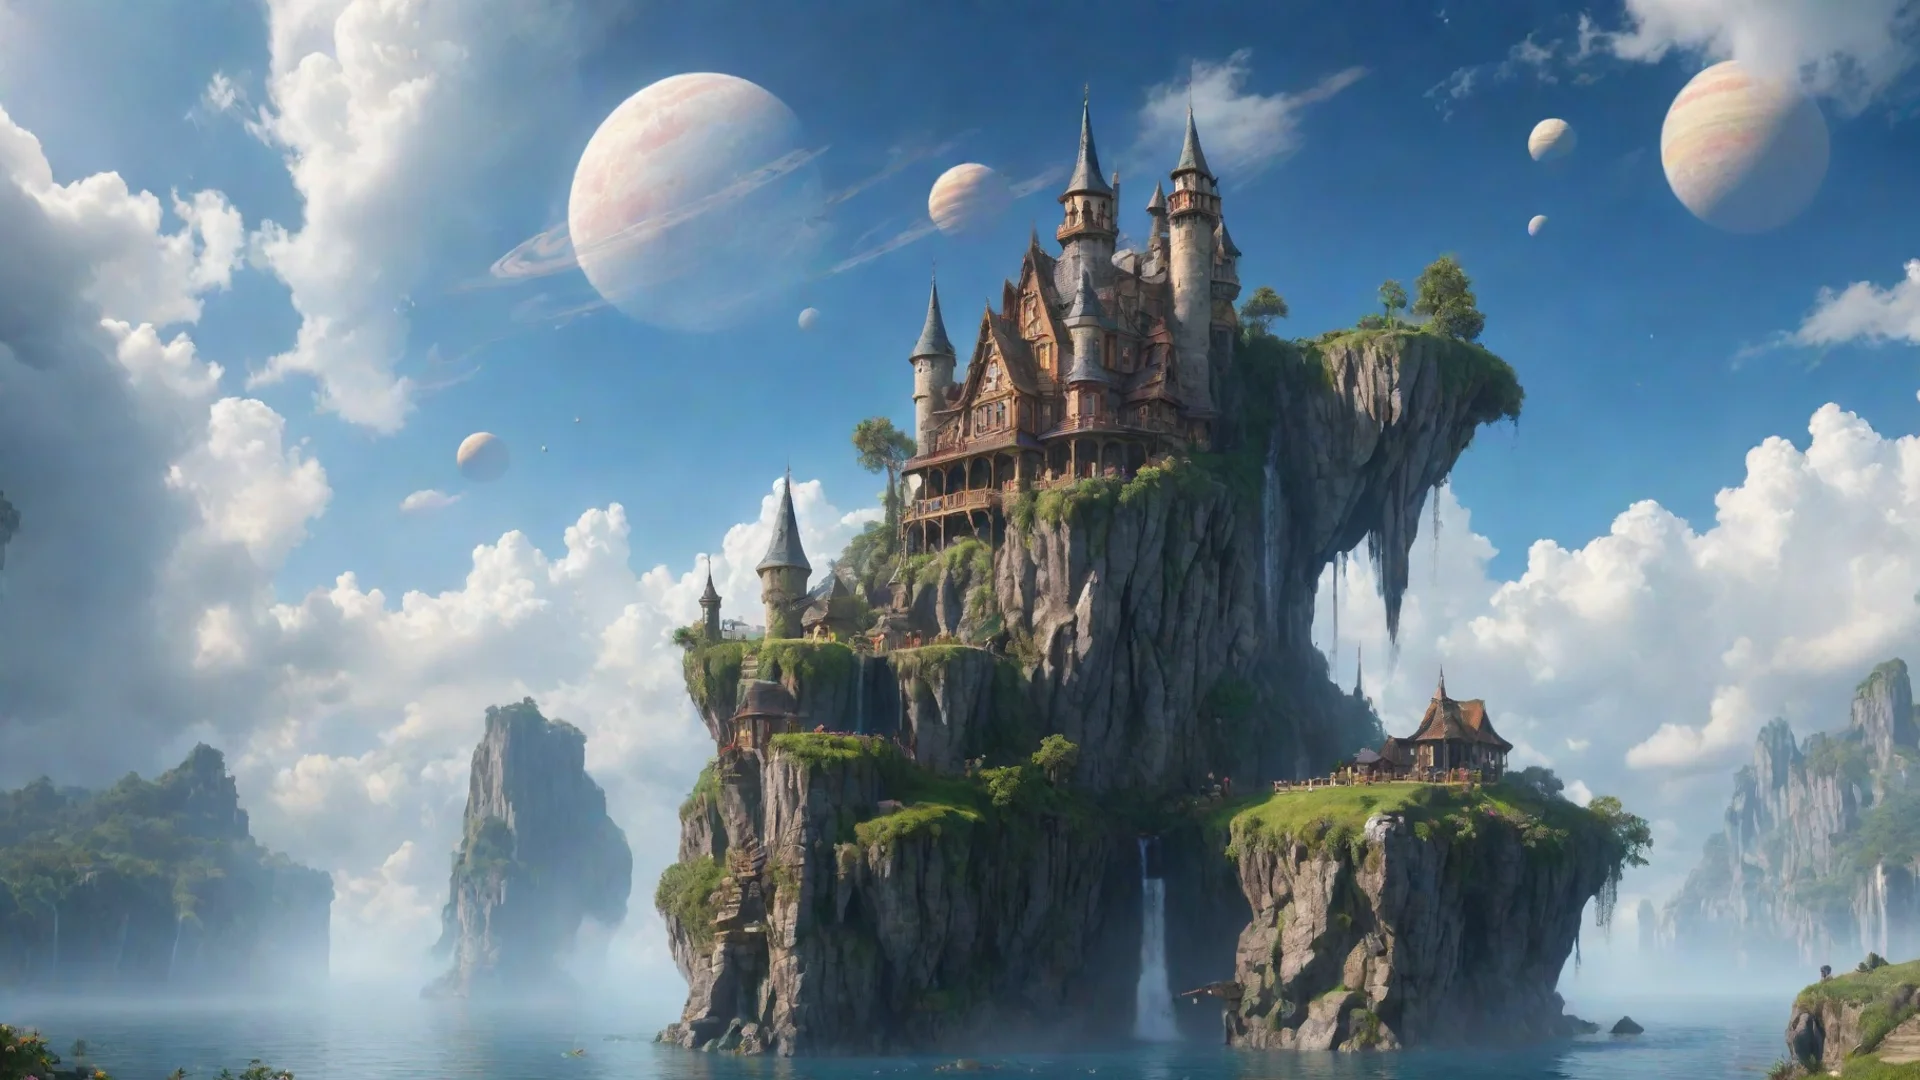 aiamazing peaceful cottage in sky epic floating castle on floating cliffs with waterfalls down beautiful sky with saturn planets awesome portrait 2 wide